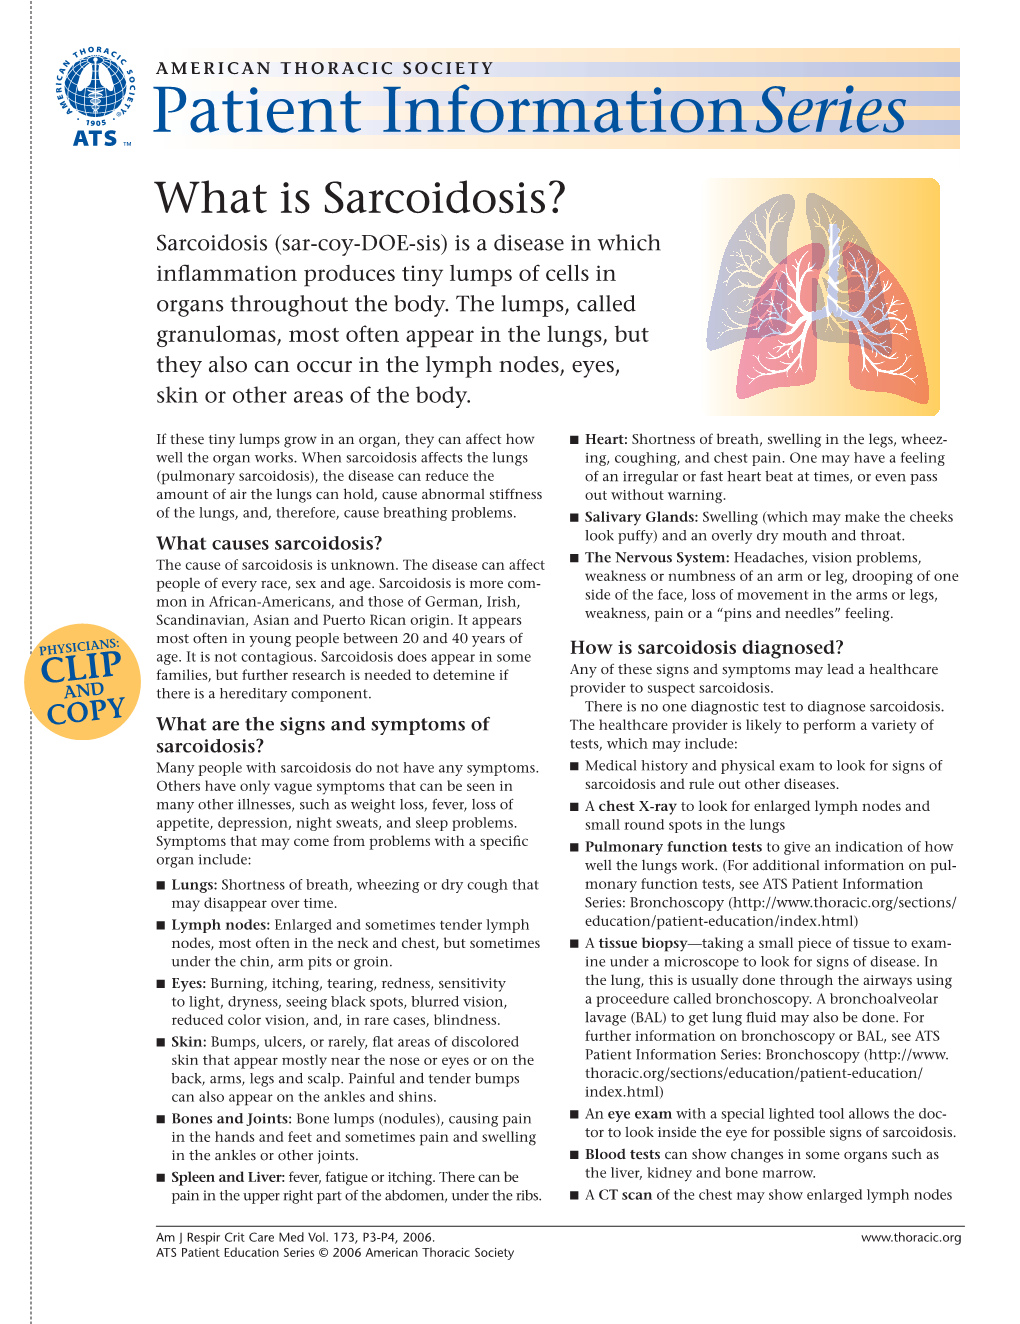 What Is Sarcoidosis? Sarcoidosis (Sar-Coy-DOE-Sis) Is a Disease in Which Inﬂammation Produces Tiny Lumps of Cells in Organs Throughout the Body